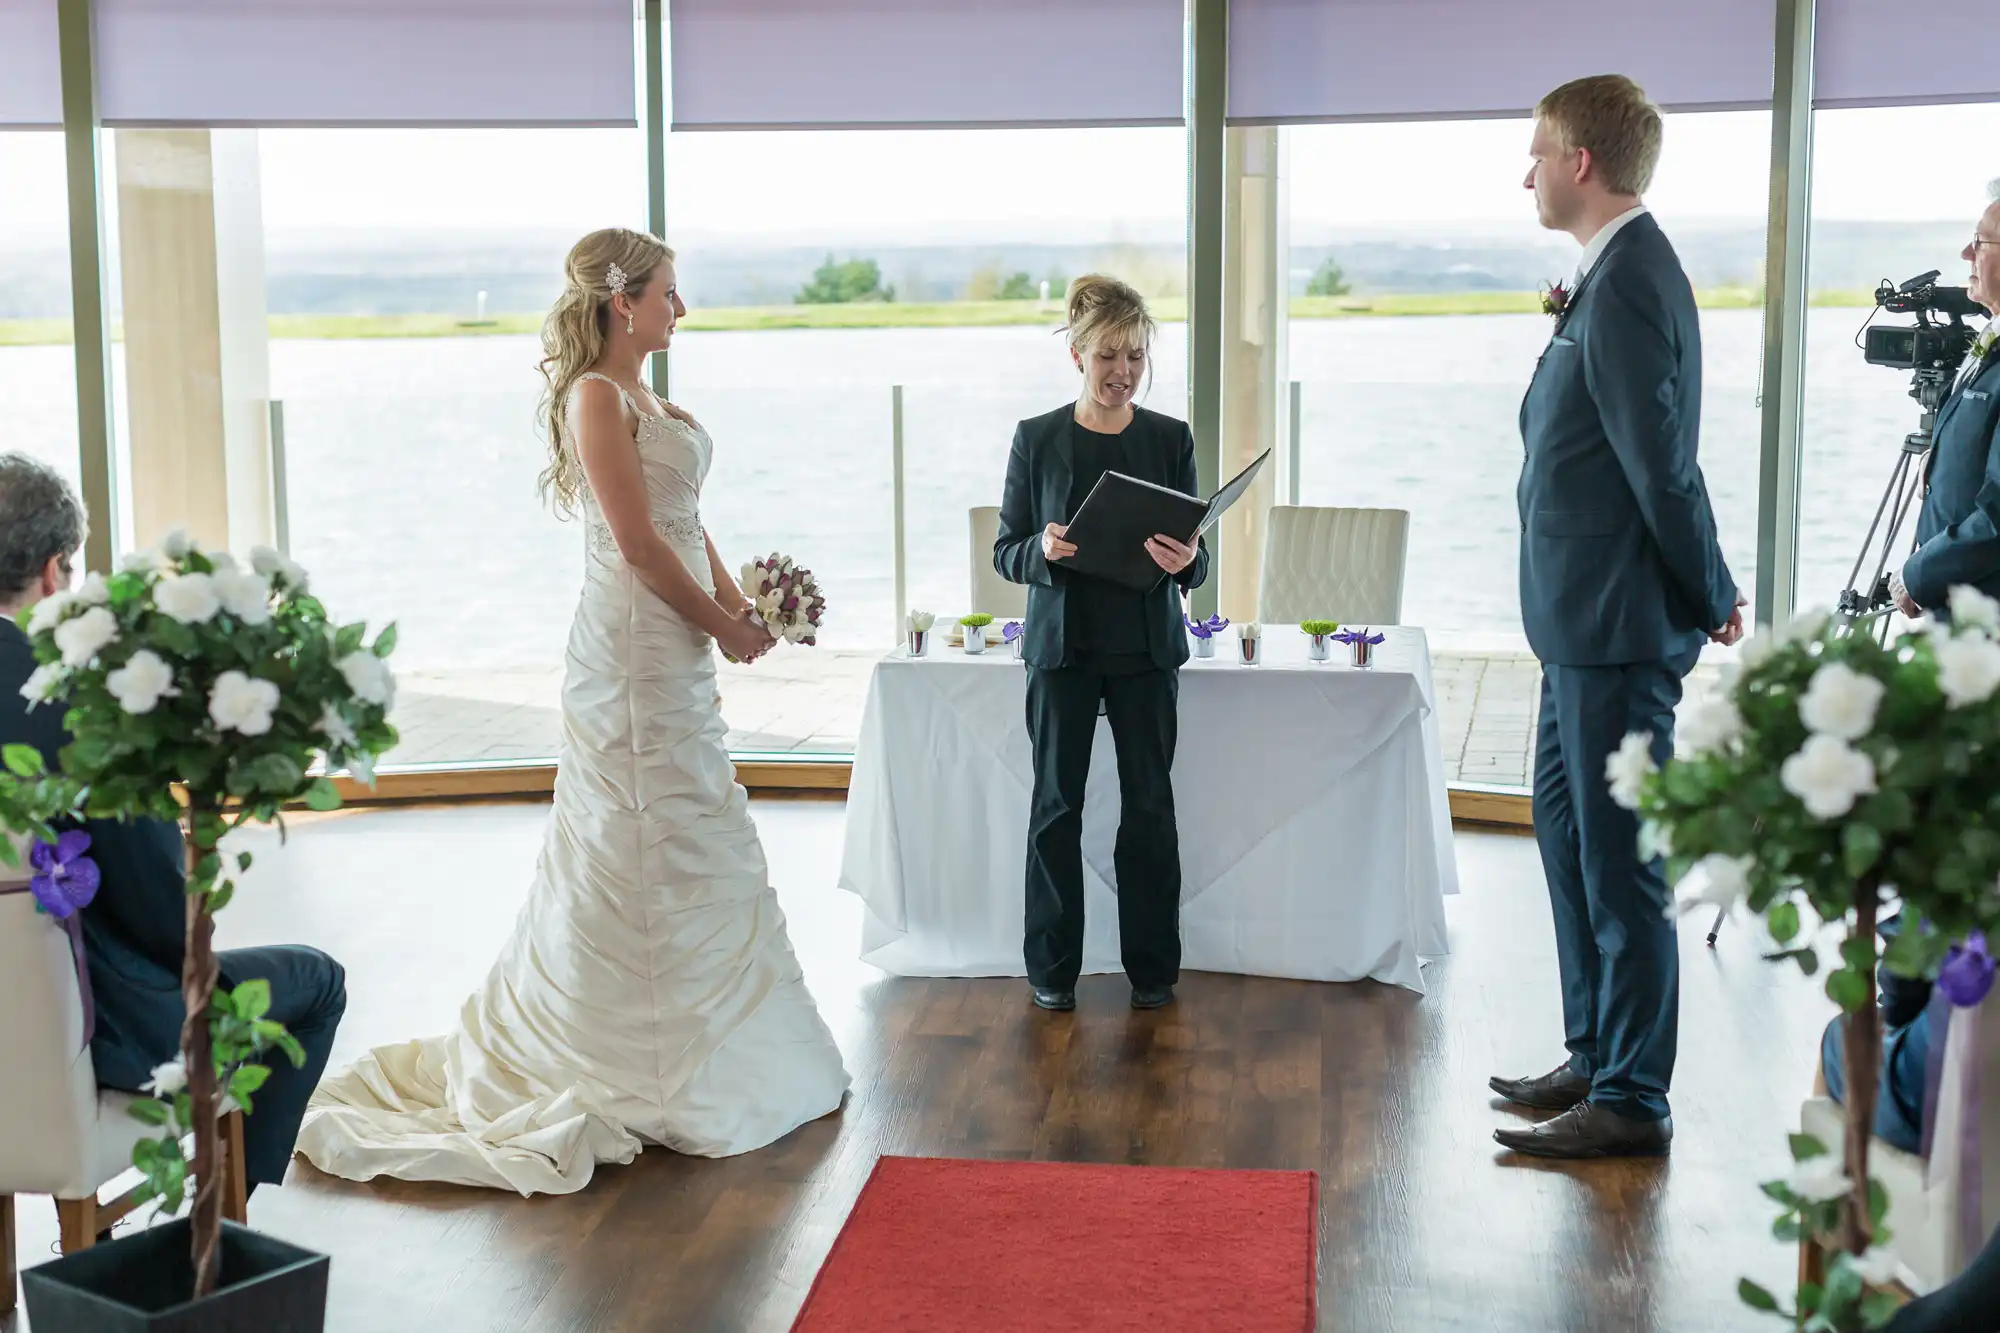 A bride and groom stand facing each other during a wedding ceremony, with an officiant reading from a book in a room overlooking a large body of water.